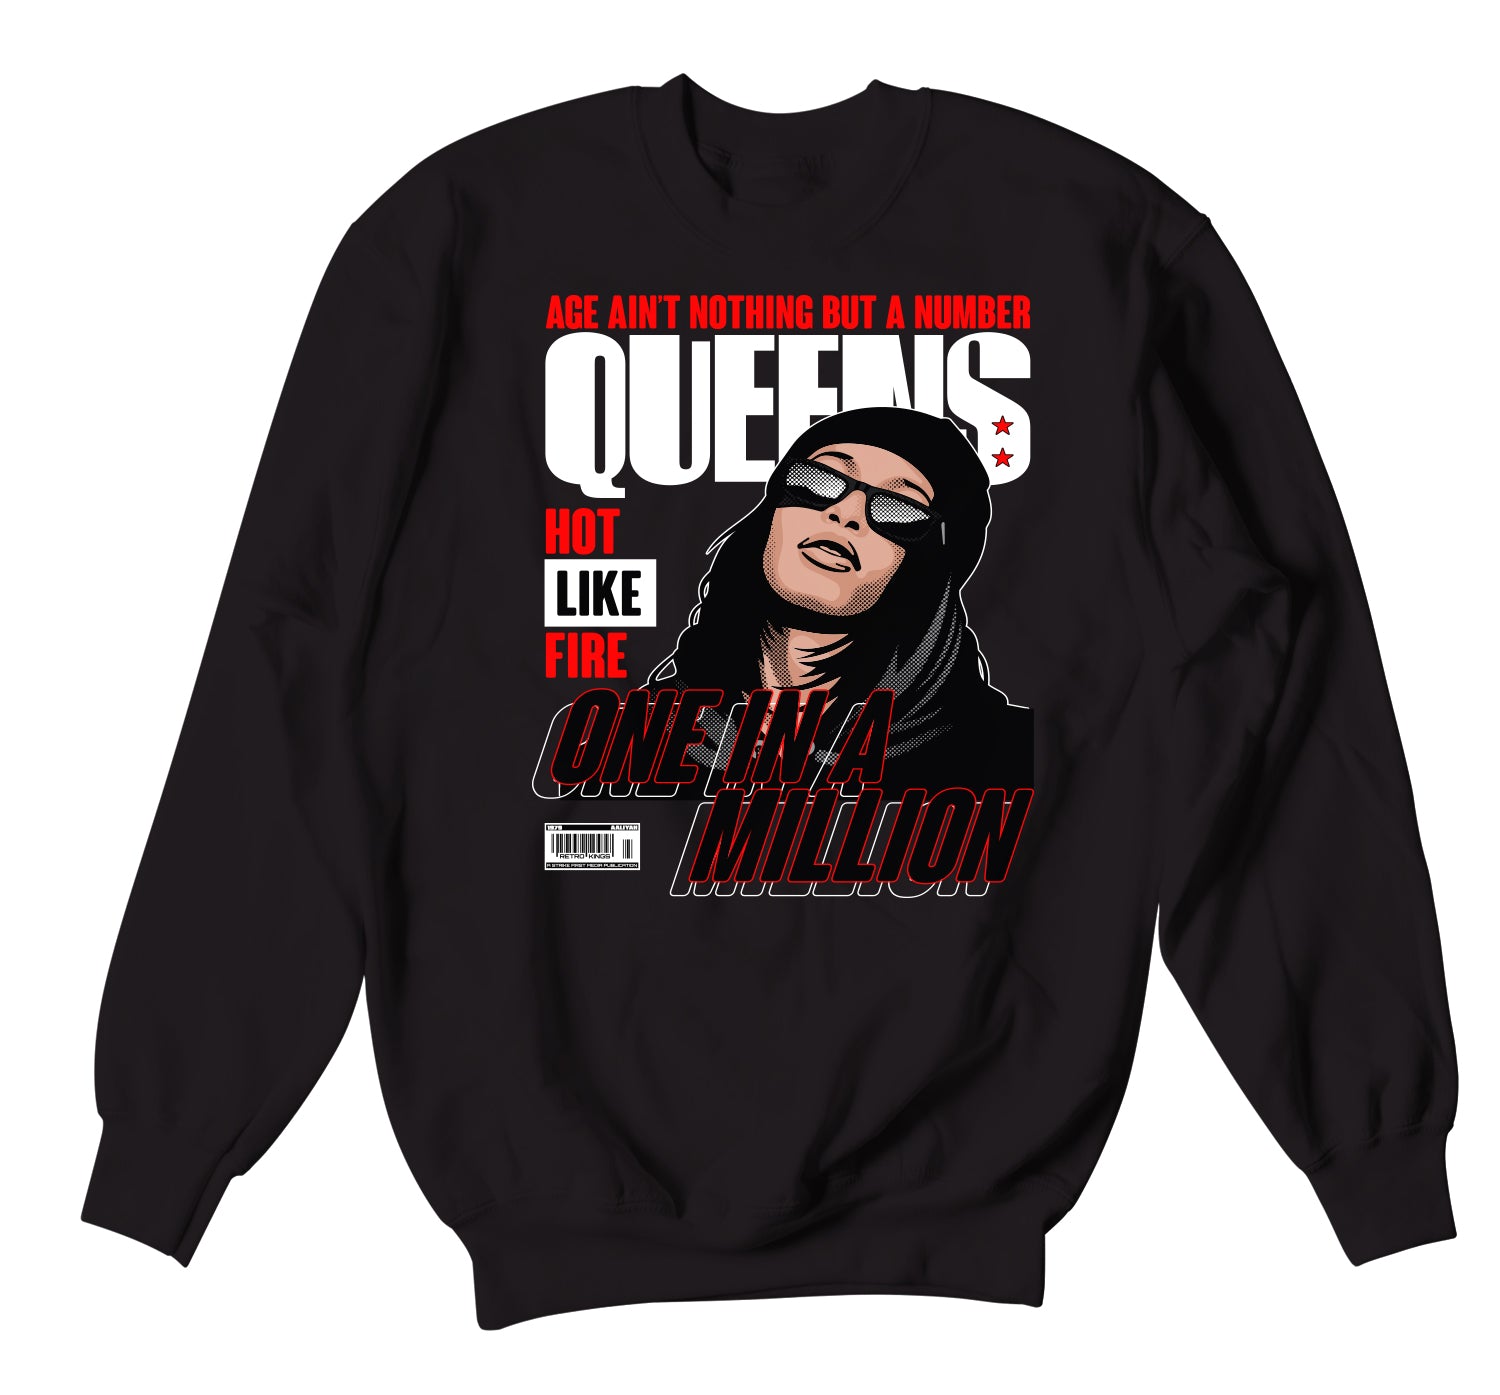 Bred 350 Sweater - Queens - Black